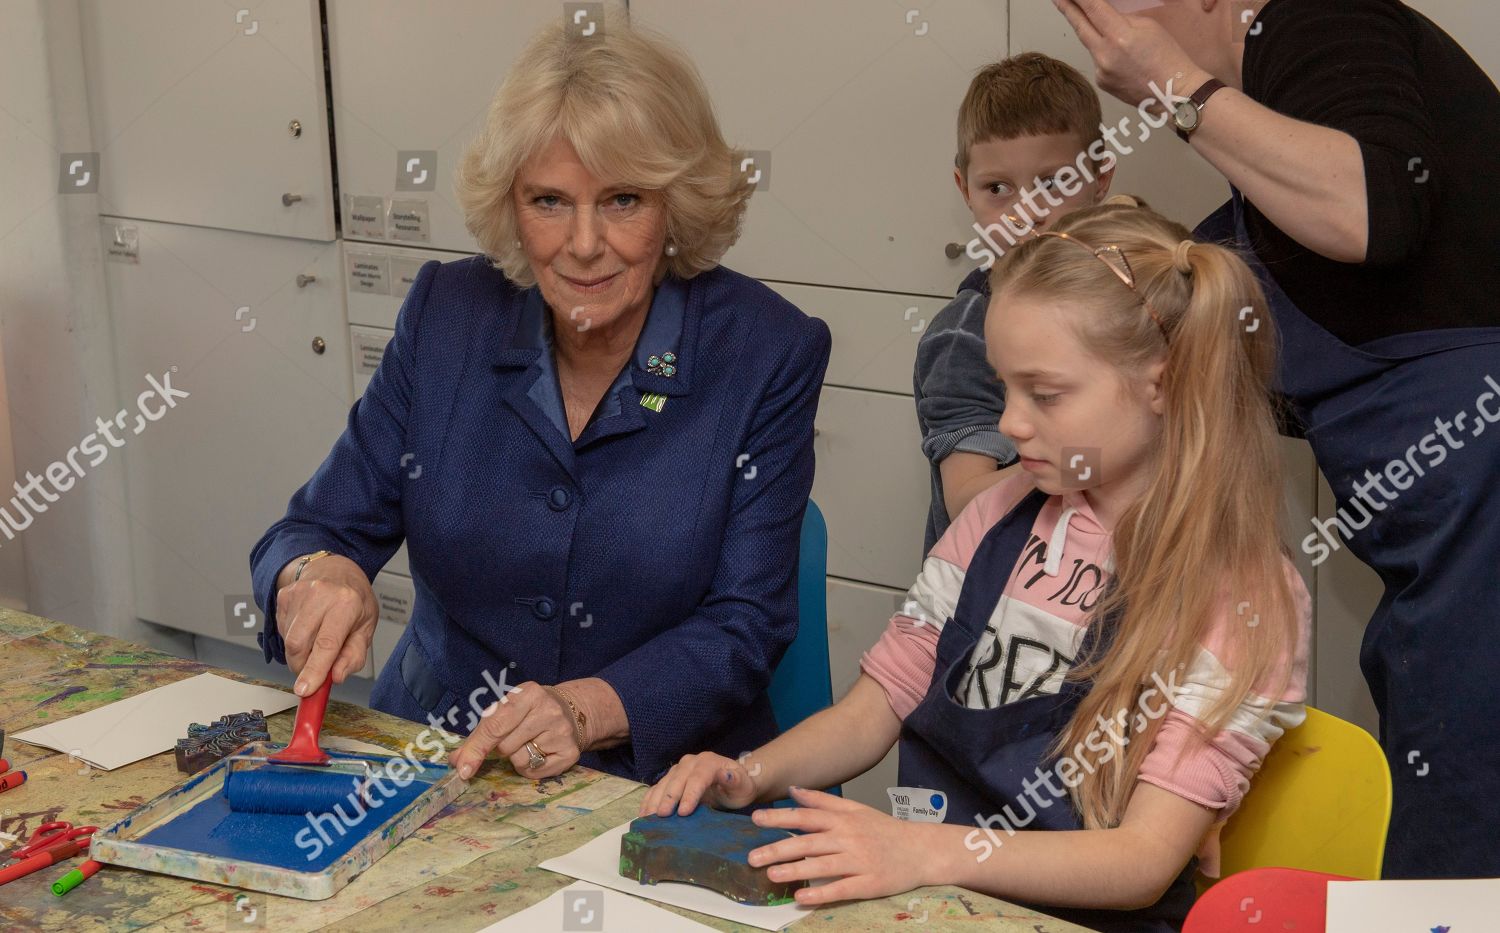 camilla-duchess-of-cornwall-visit-to-the-william-morris-gallery-london-uk-shutterstock-editorial-10114356o.jpg